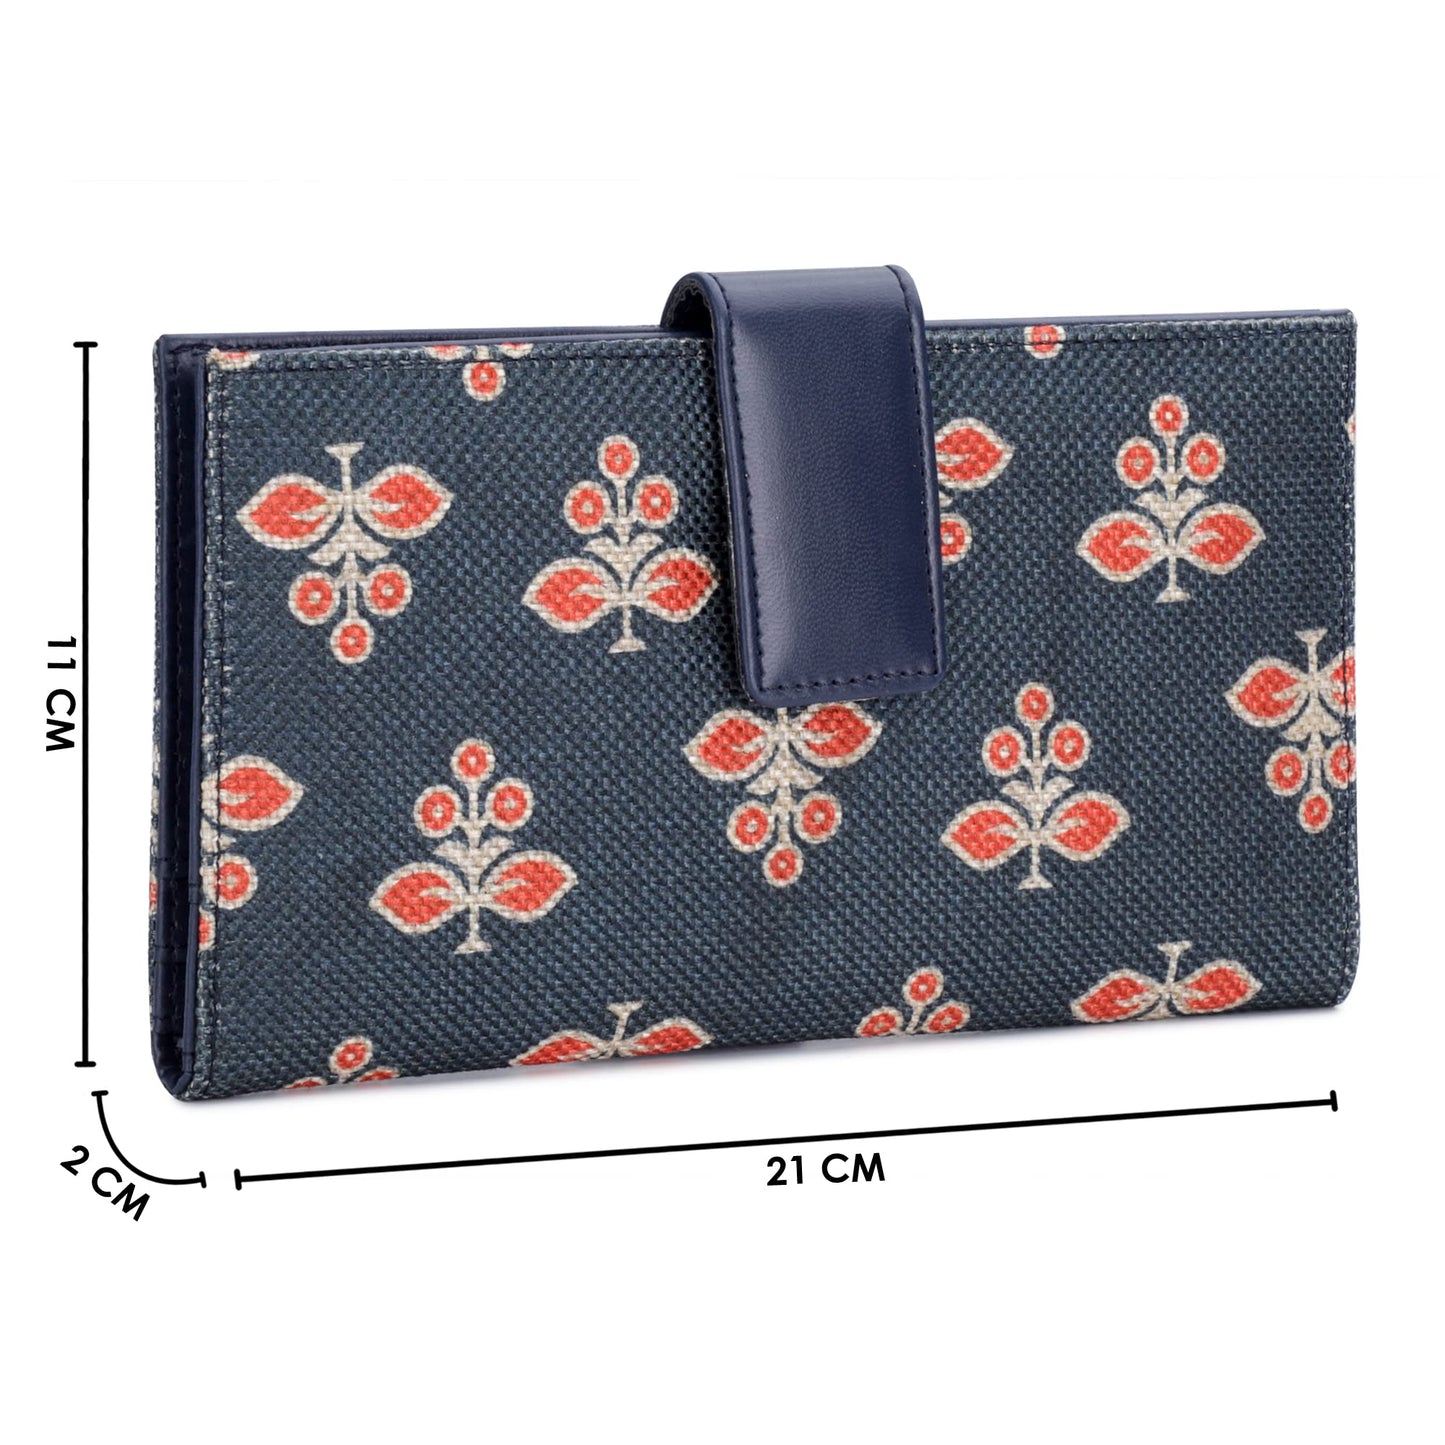 THE CLOWNFISH Orlanda Collection Printed Handicraft Fabric Womens Wallet Clutch Ladies Purse with Multiple Card holders (Multicolour)